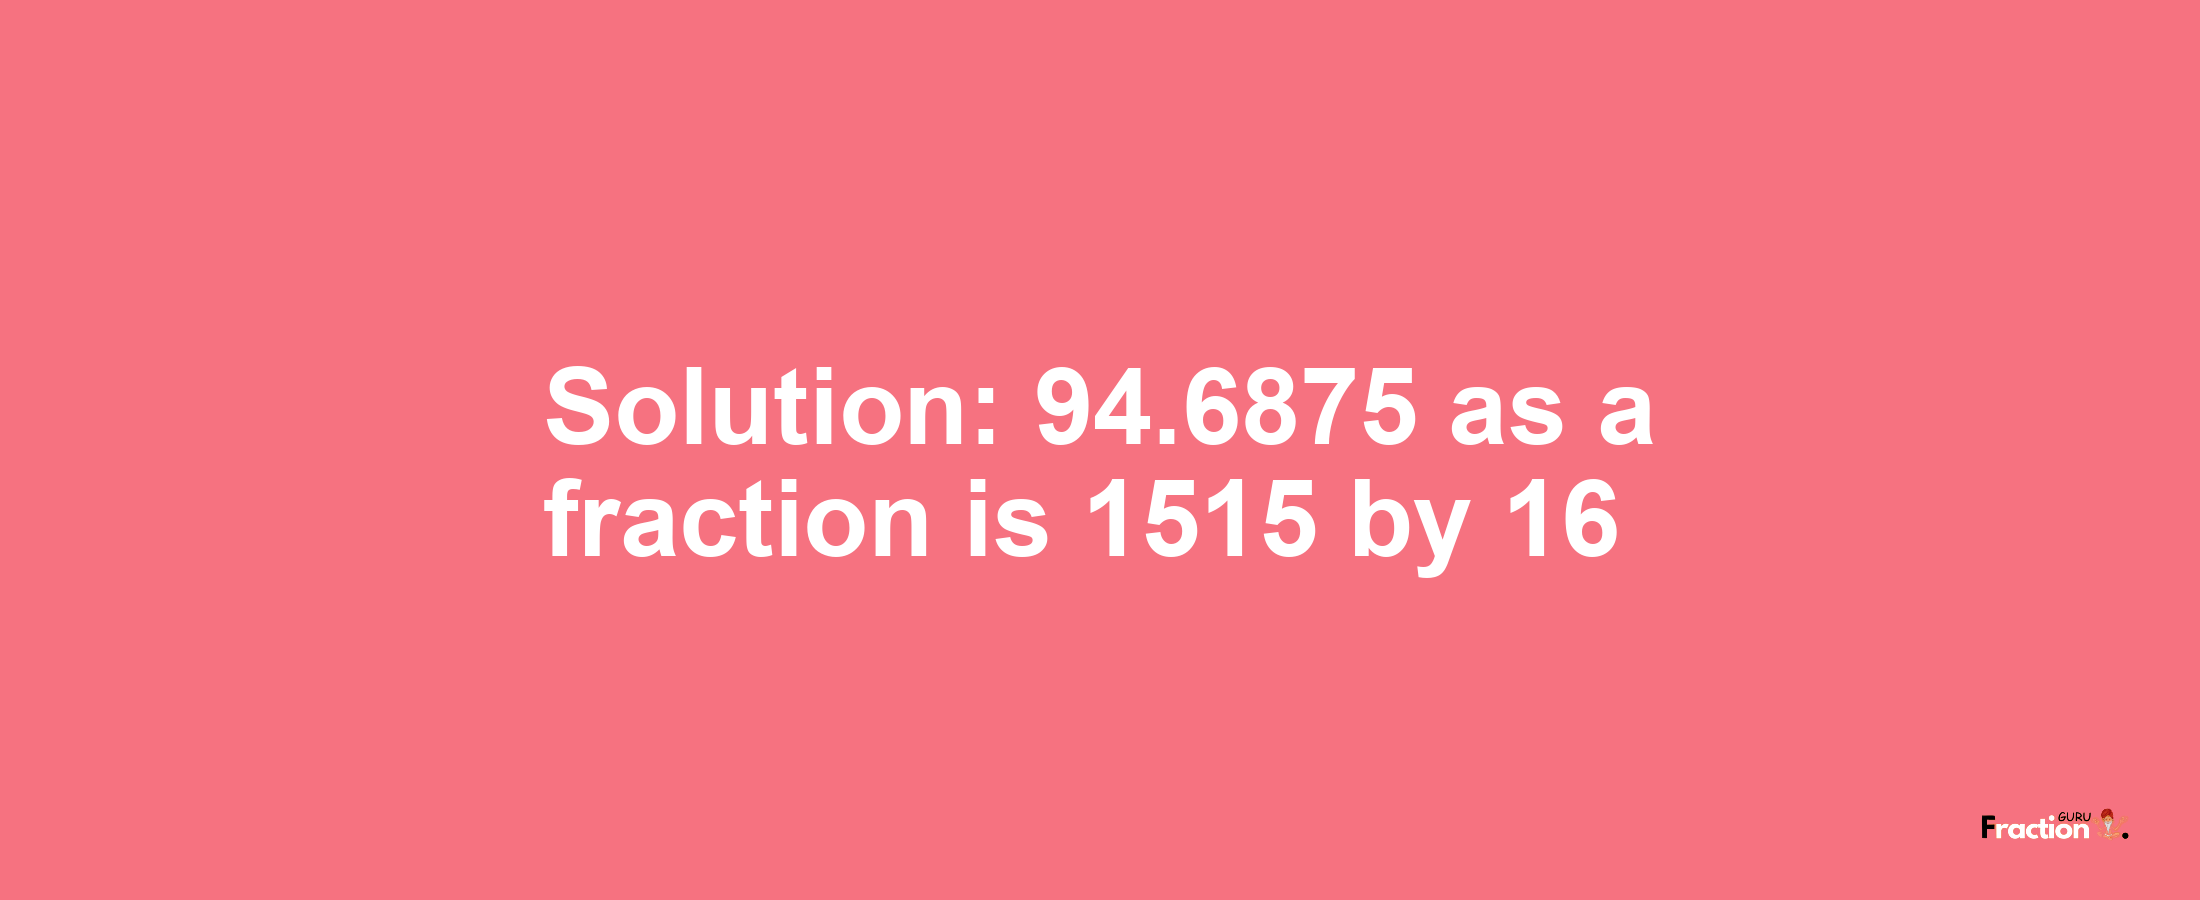 Solution:94.6875 as a fraction is 1515/16